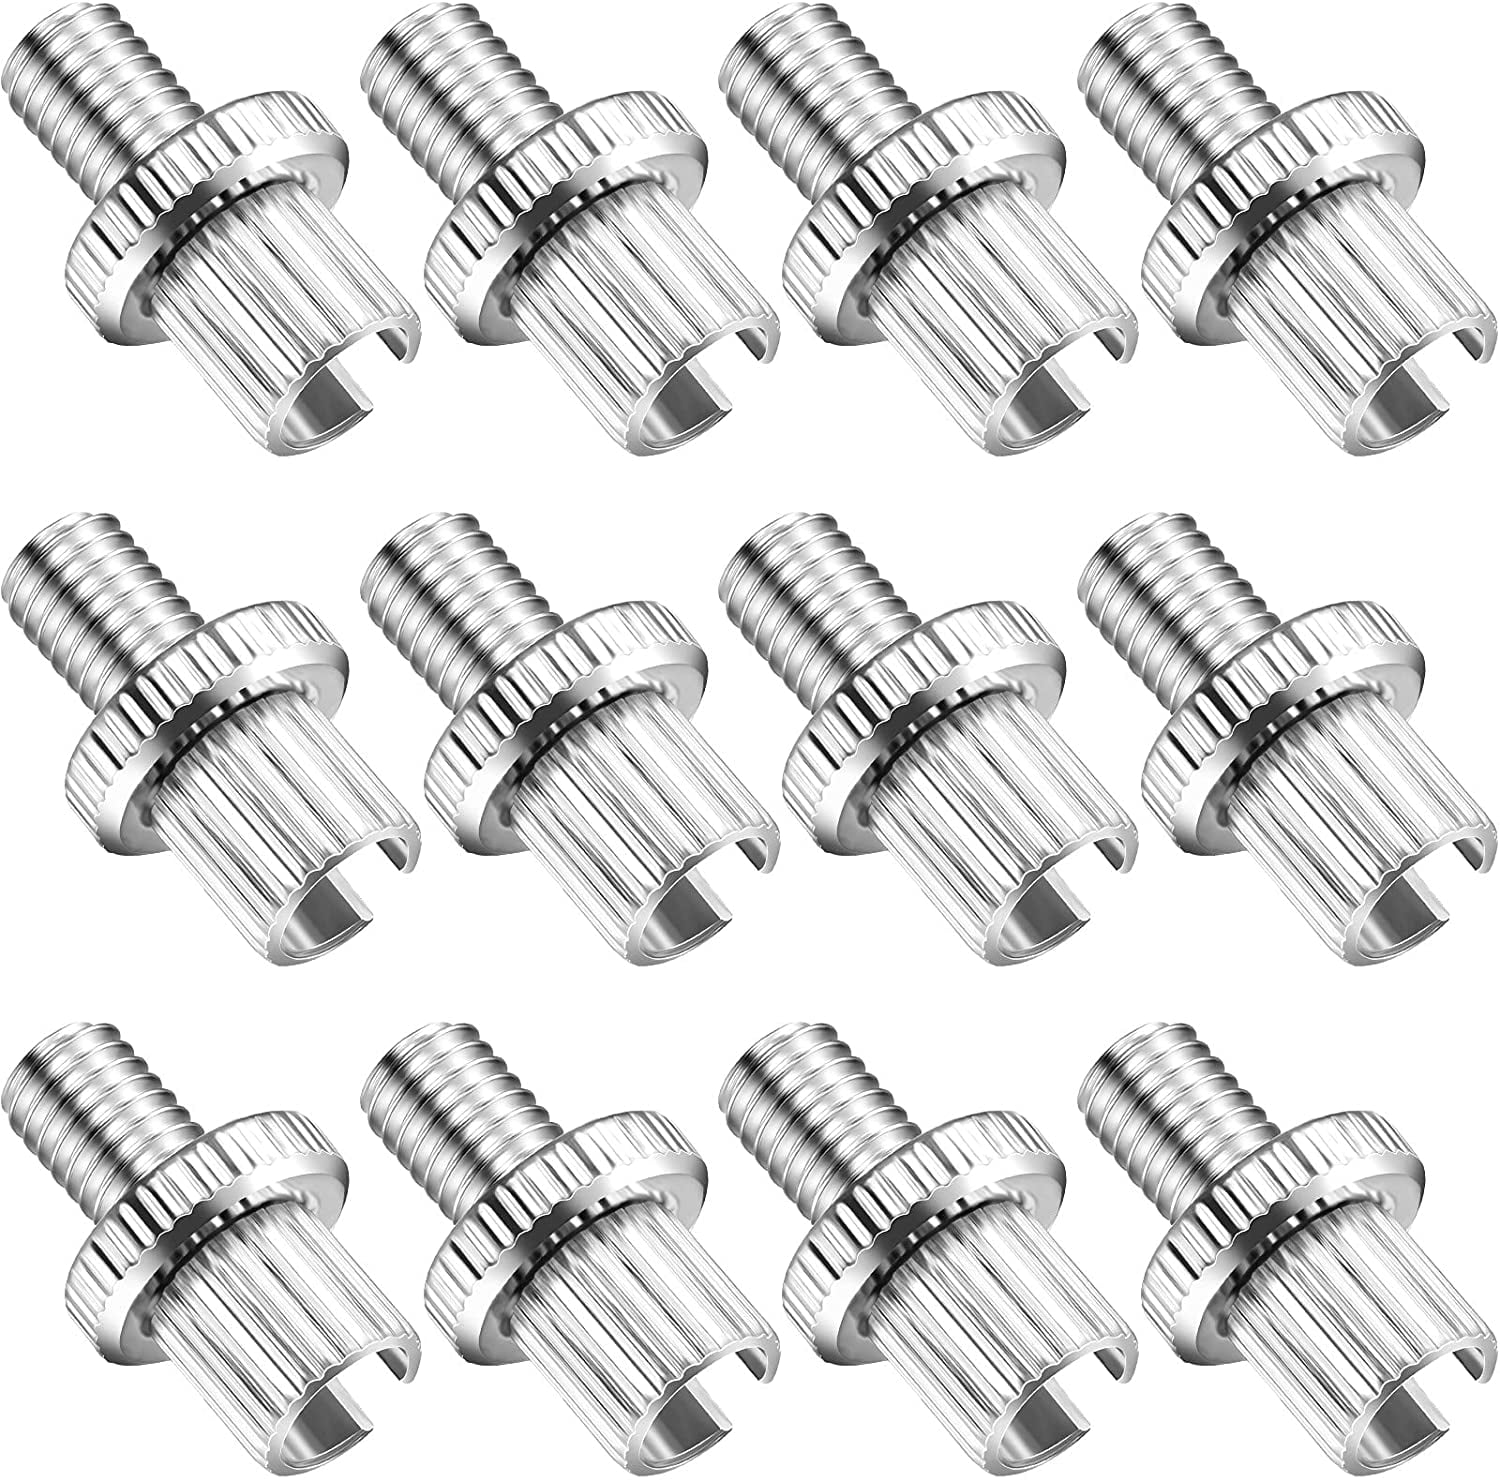 12 Pieces Clutch Brake Cable Adjuster Screw Metric Clutch Brake Cable Adjuster Compatible with ATV Motorcycle 8 mm Cable Adjuster Nut Bolts for Car Vehicle Motorcycle ATV Silver 